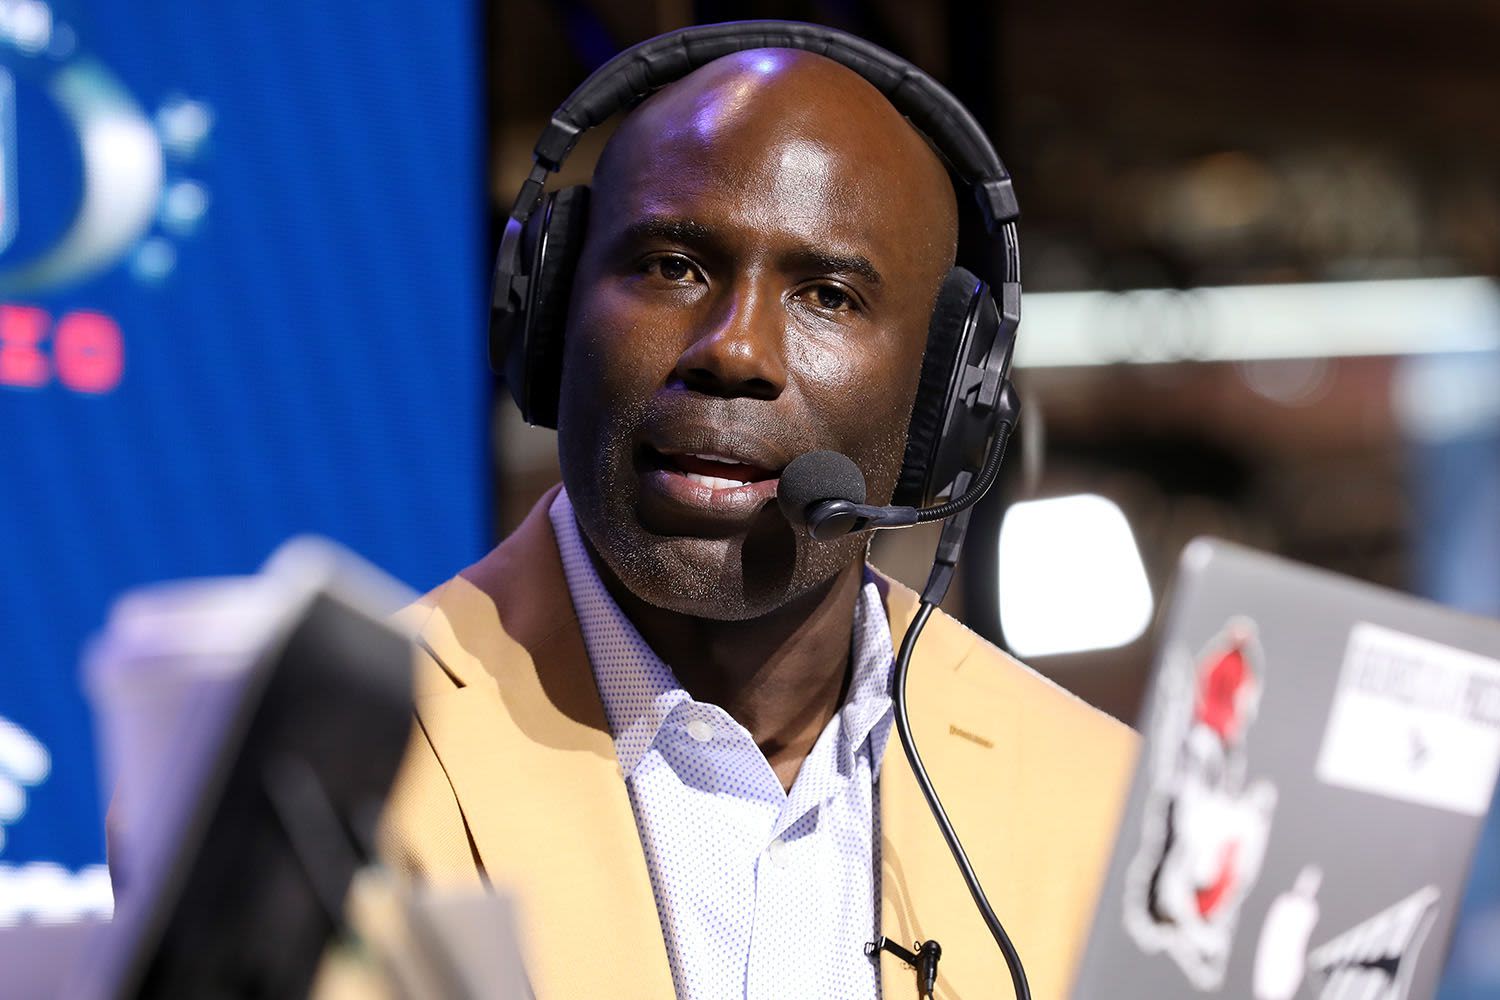 United Airlines Apologizes to Terrell Davis and Fires Flight Attendant Who Claimed the NFL Star 'Hit' Him